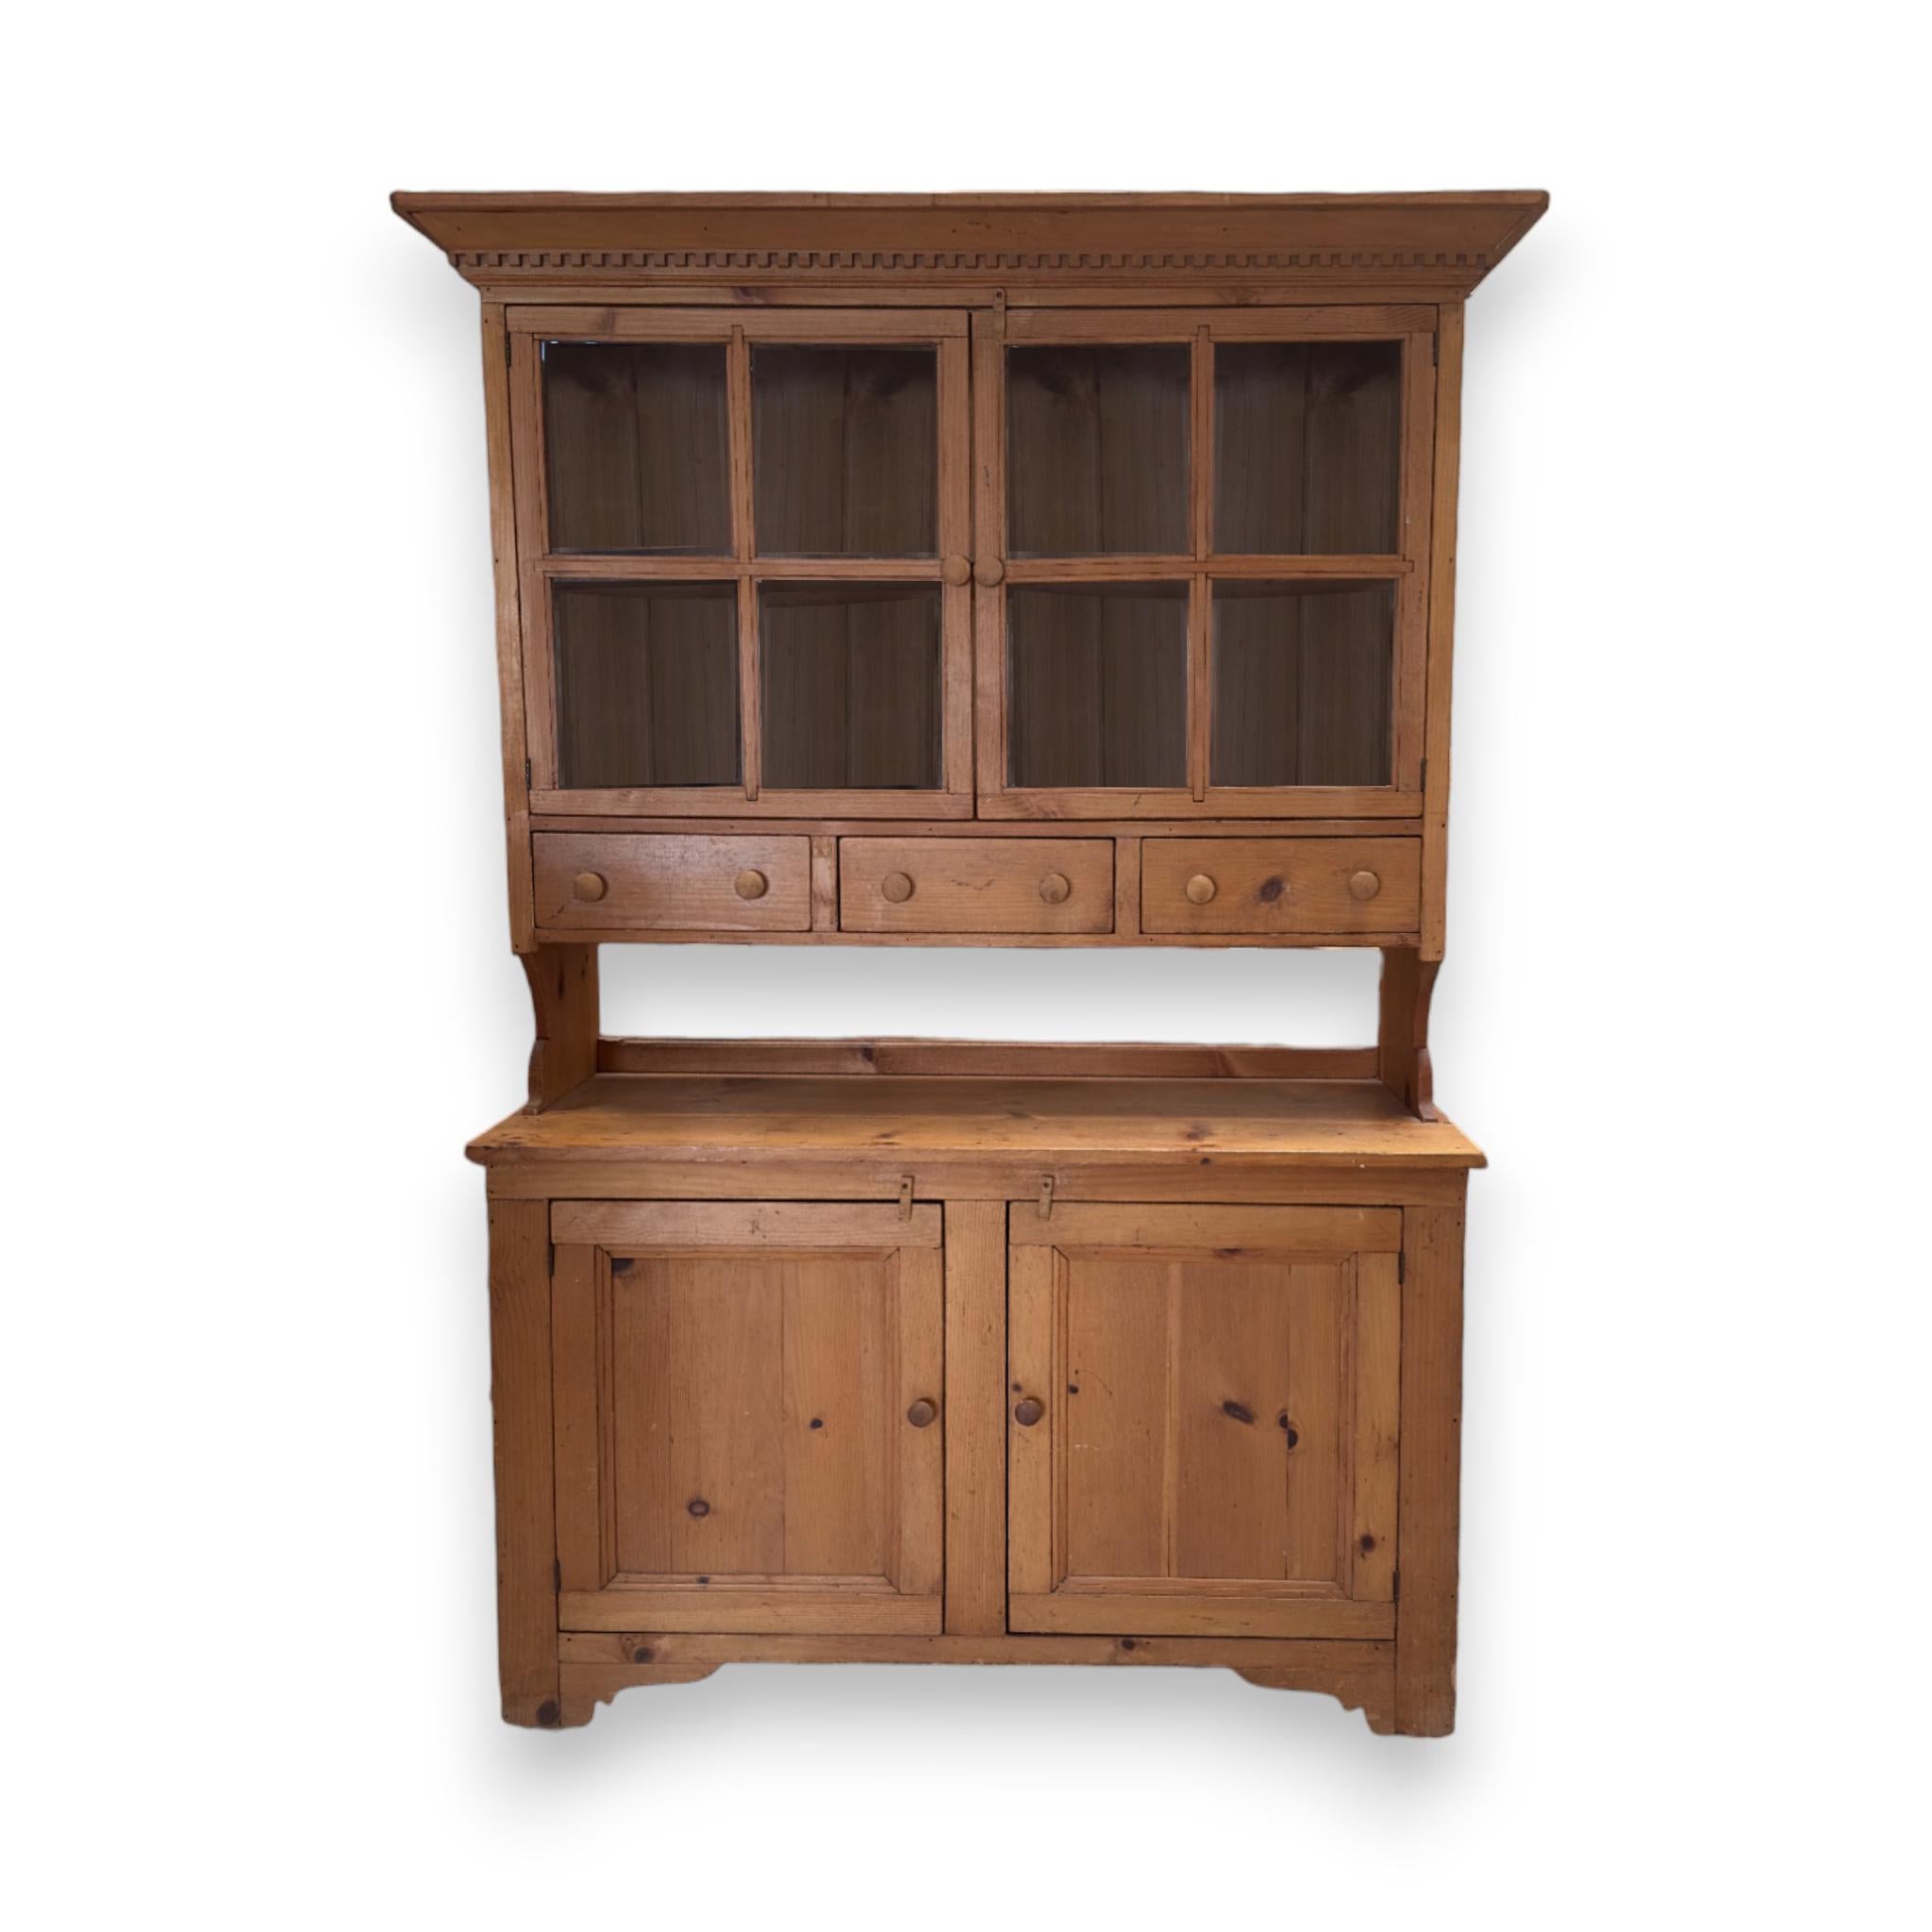 Vintage Knotted Pine Kitchen Cupboard with windowed upper cabinets, pull out drawers, and bottom shelving.